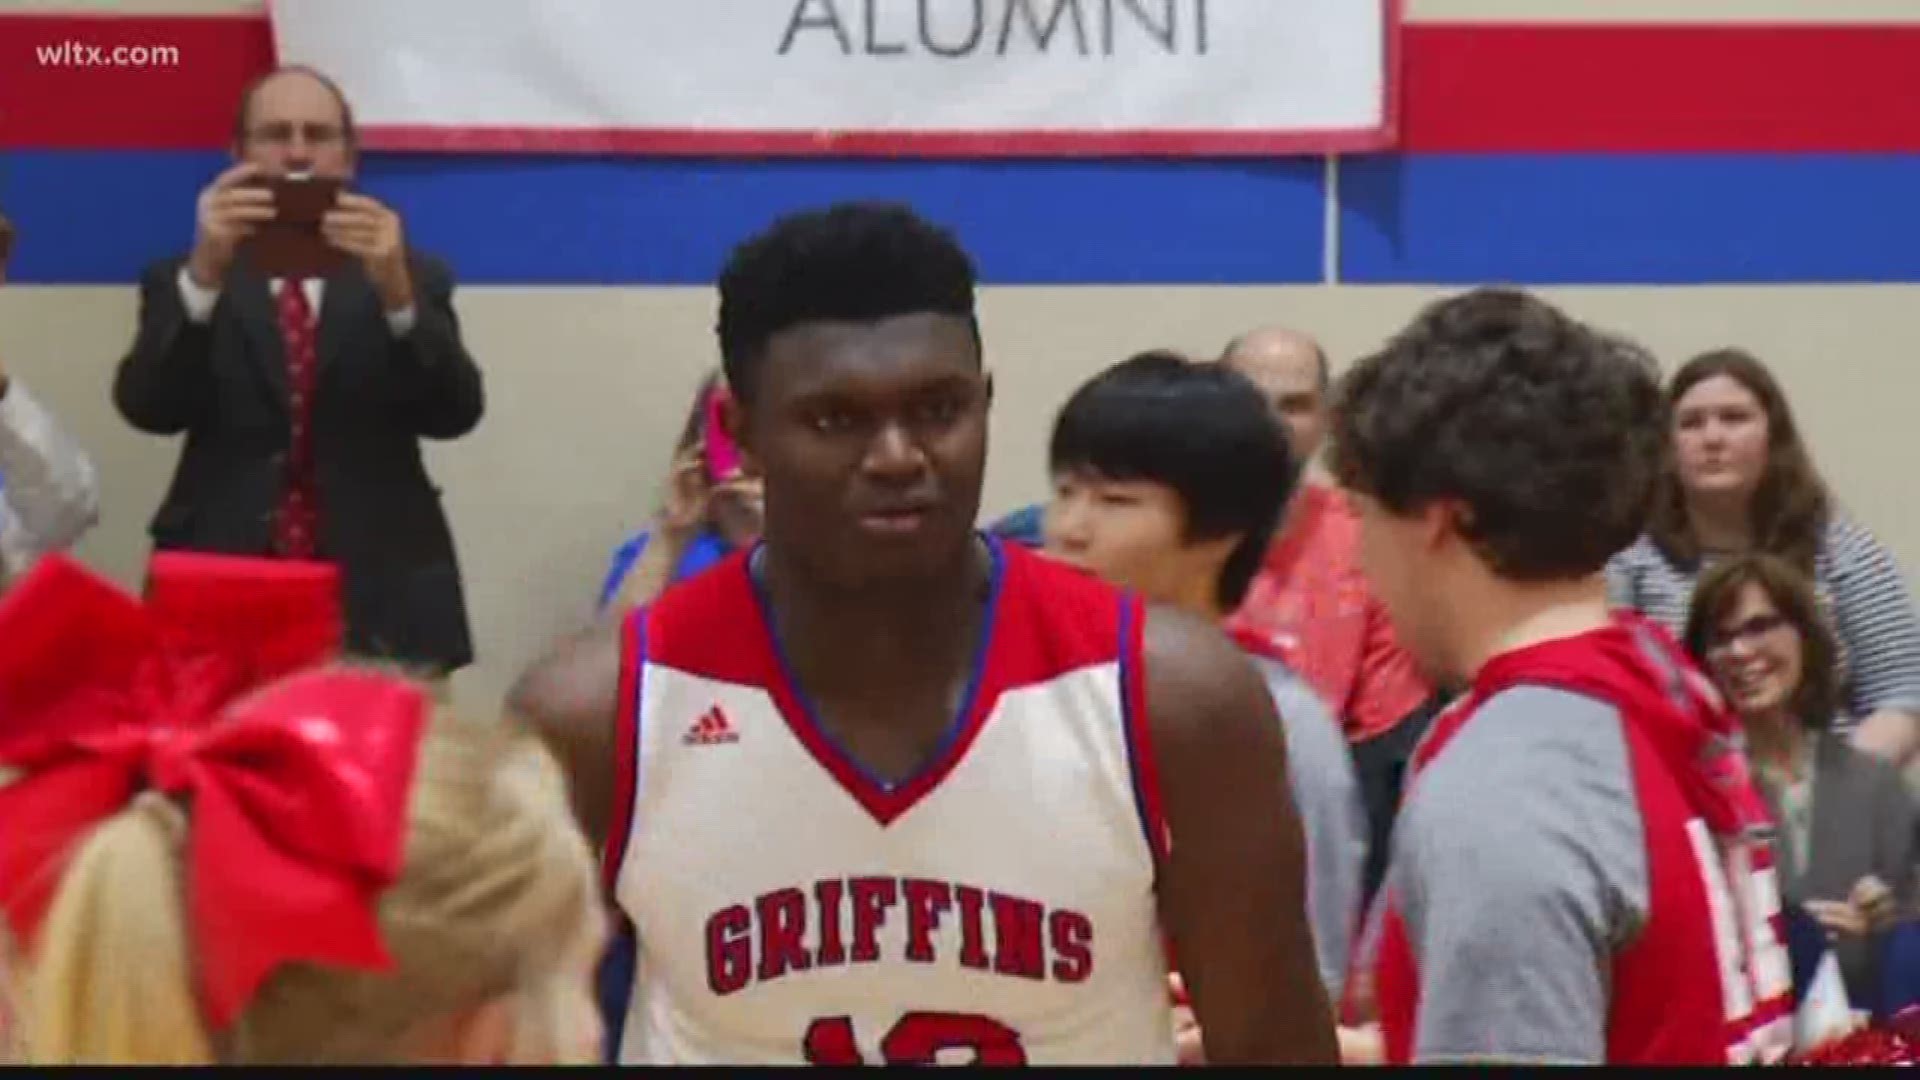 Saturday night in the Upstate, Spartanburg Day phenom Zion Williamson will make one school giddy when he makes his college choice official.